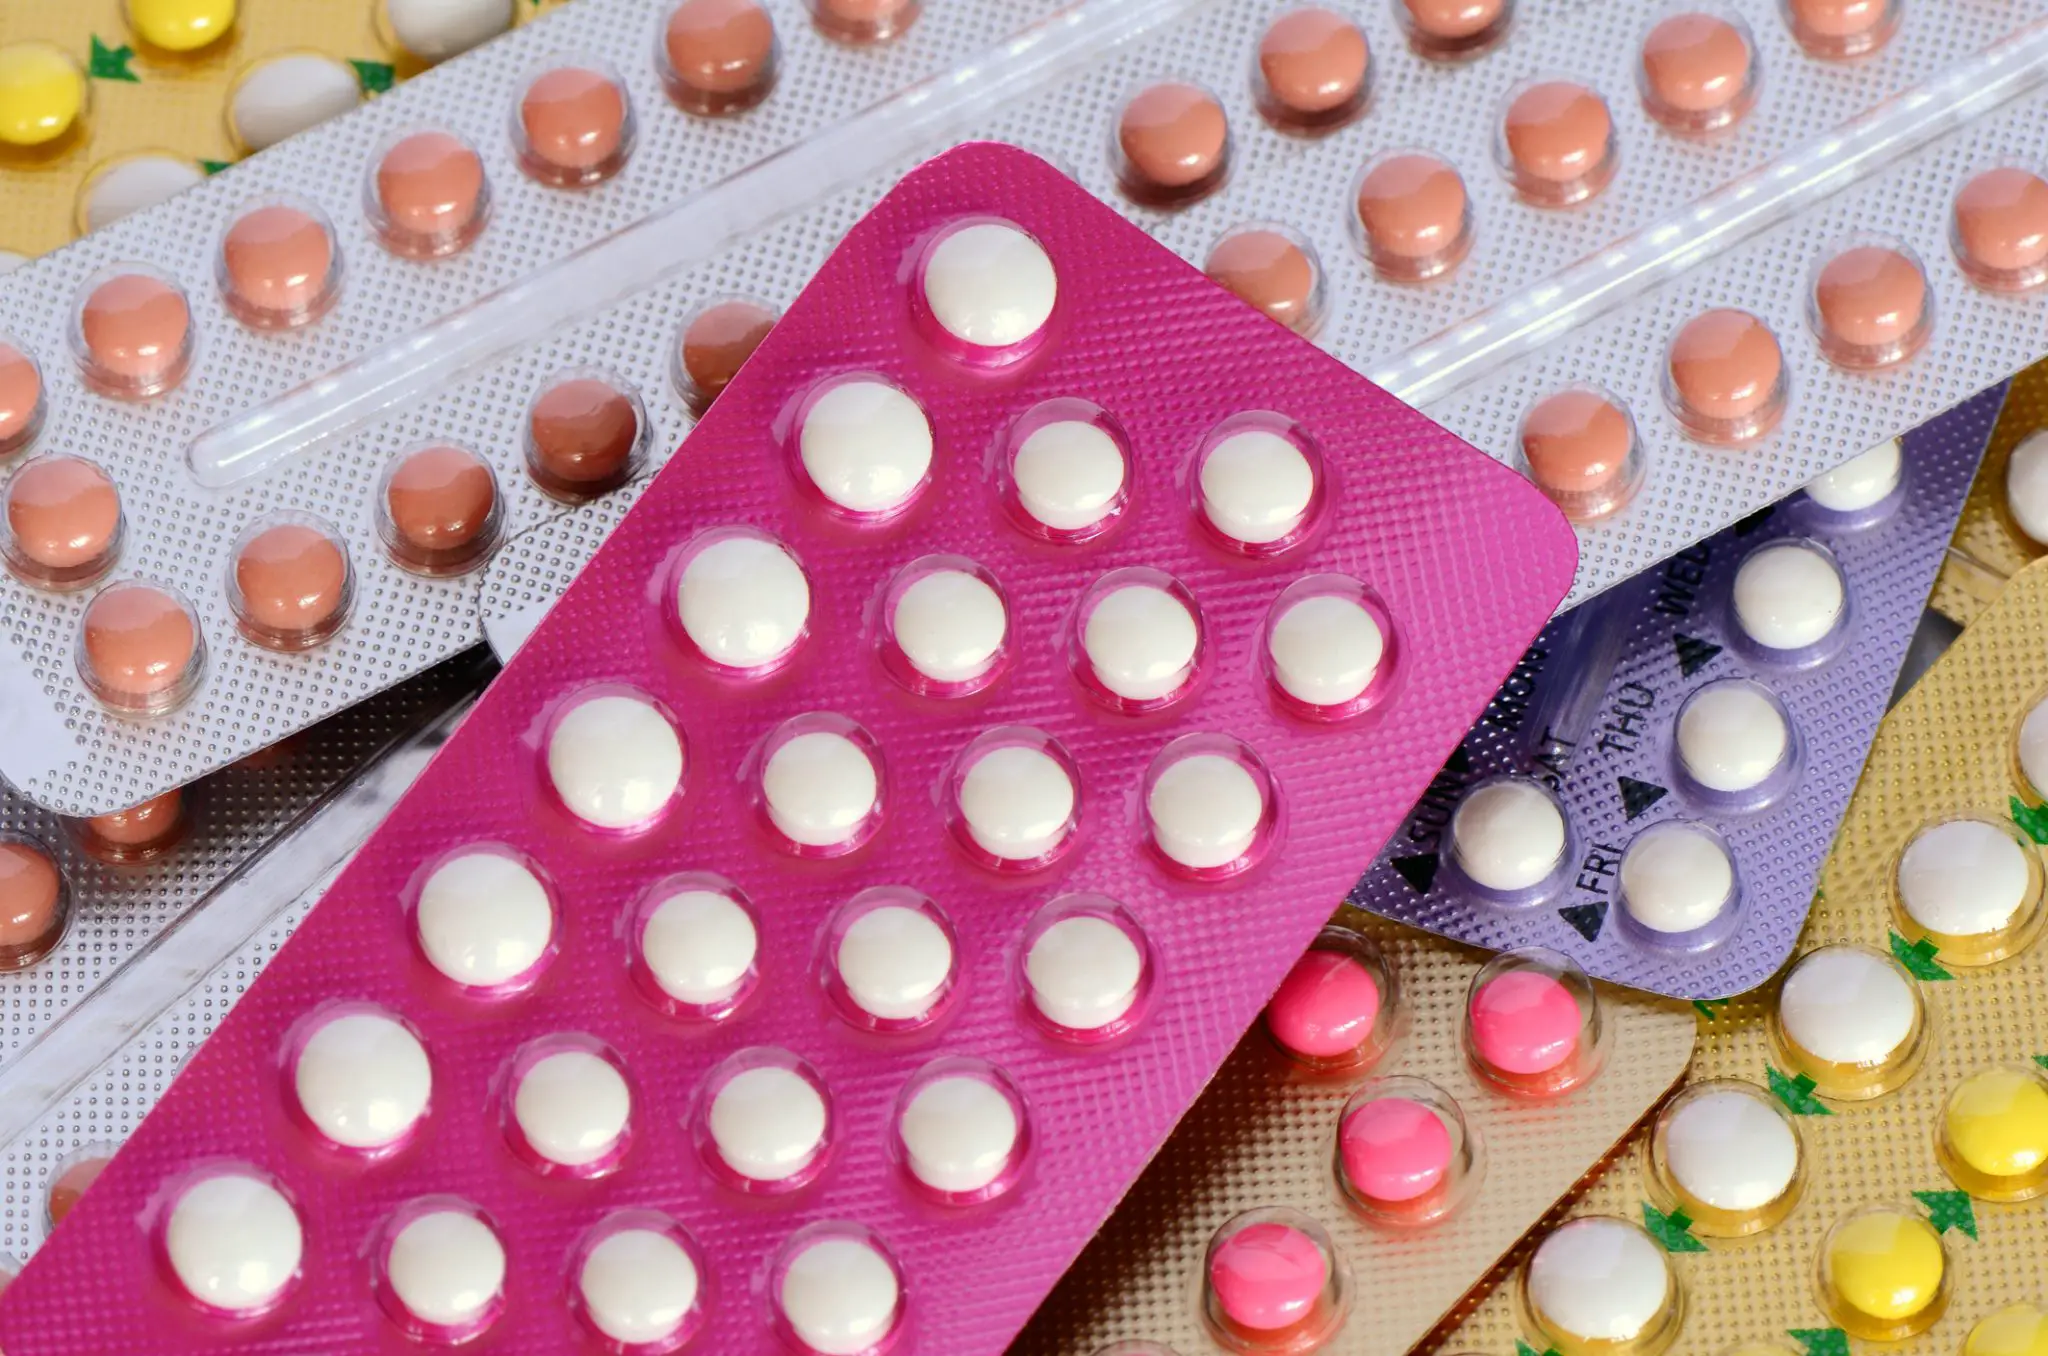 My story of being on the pill